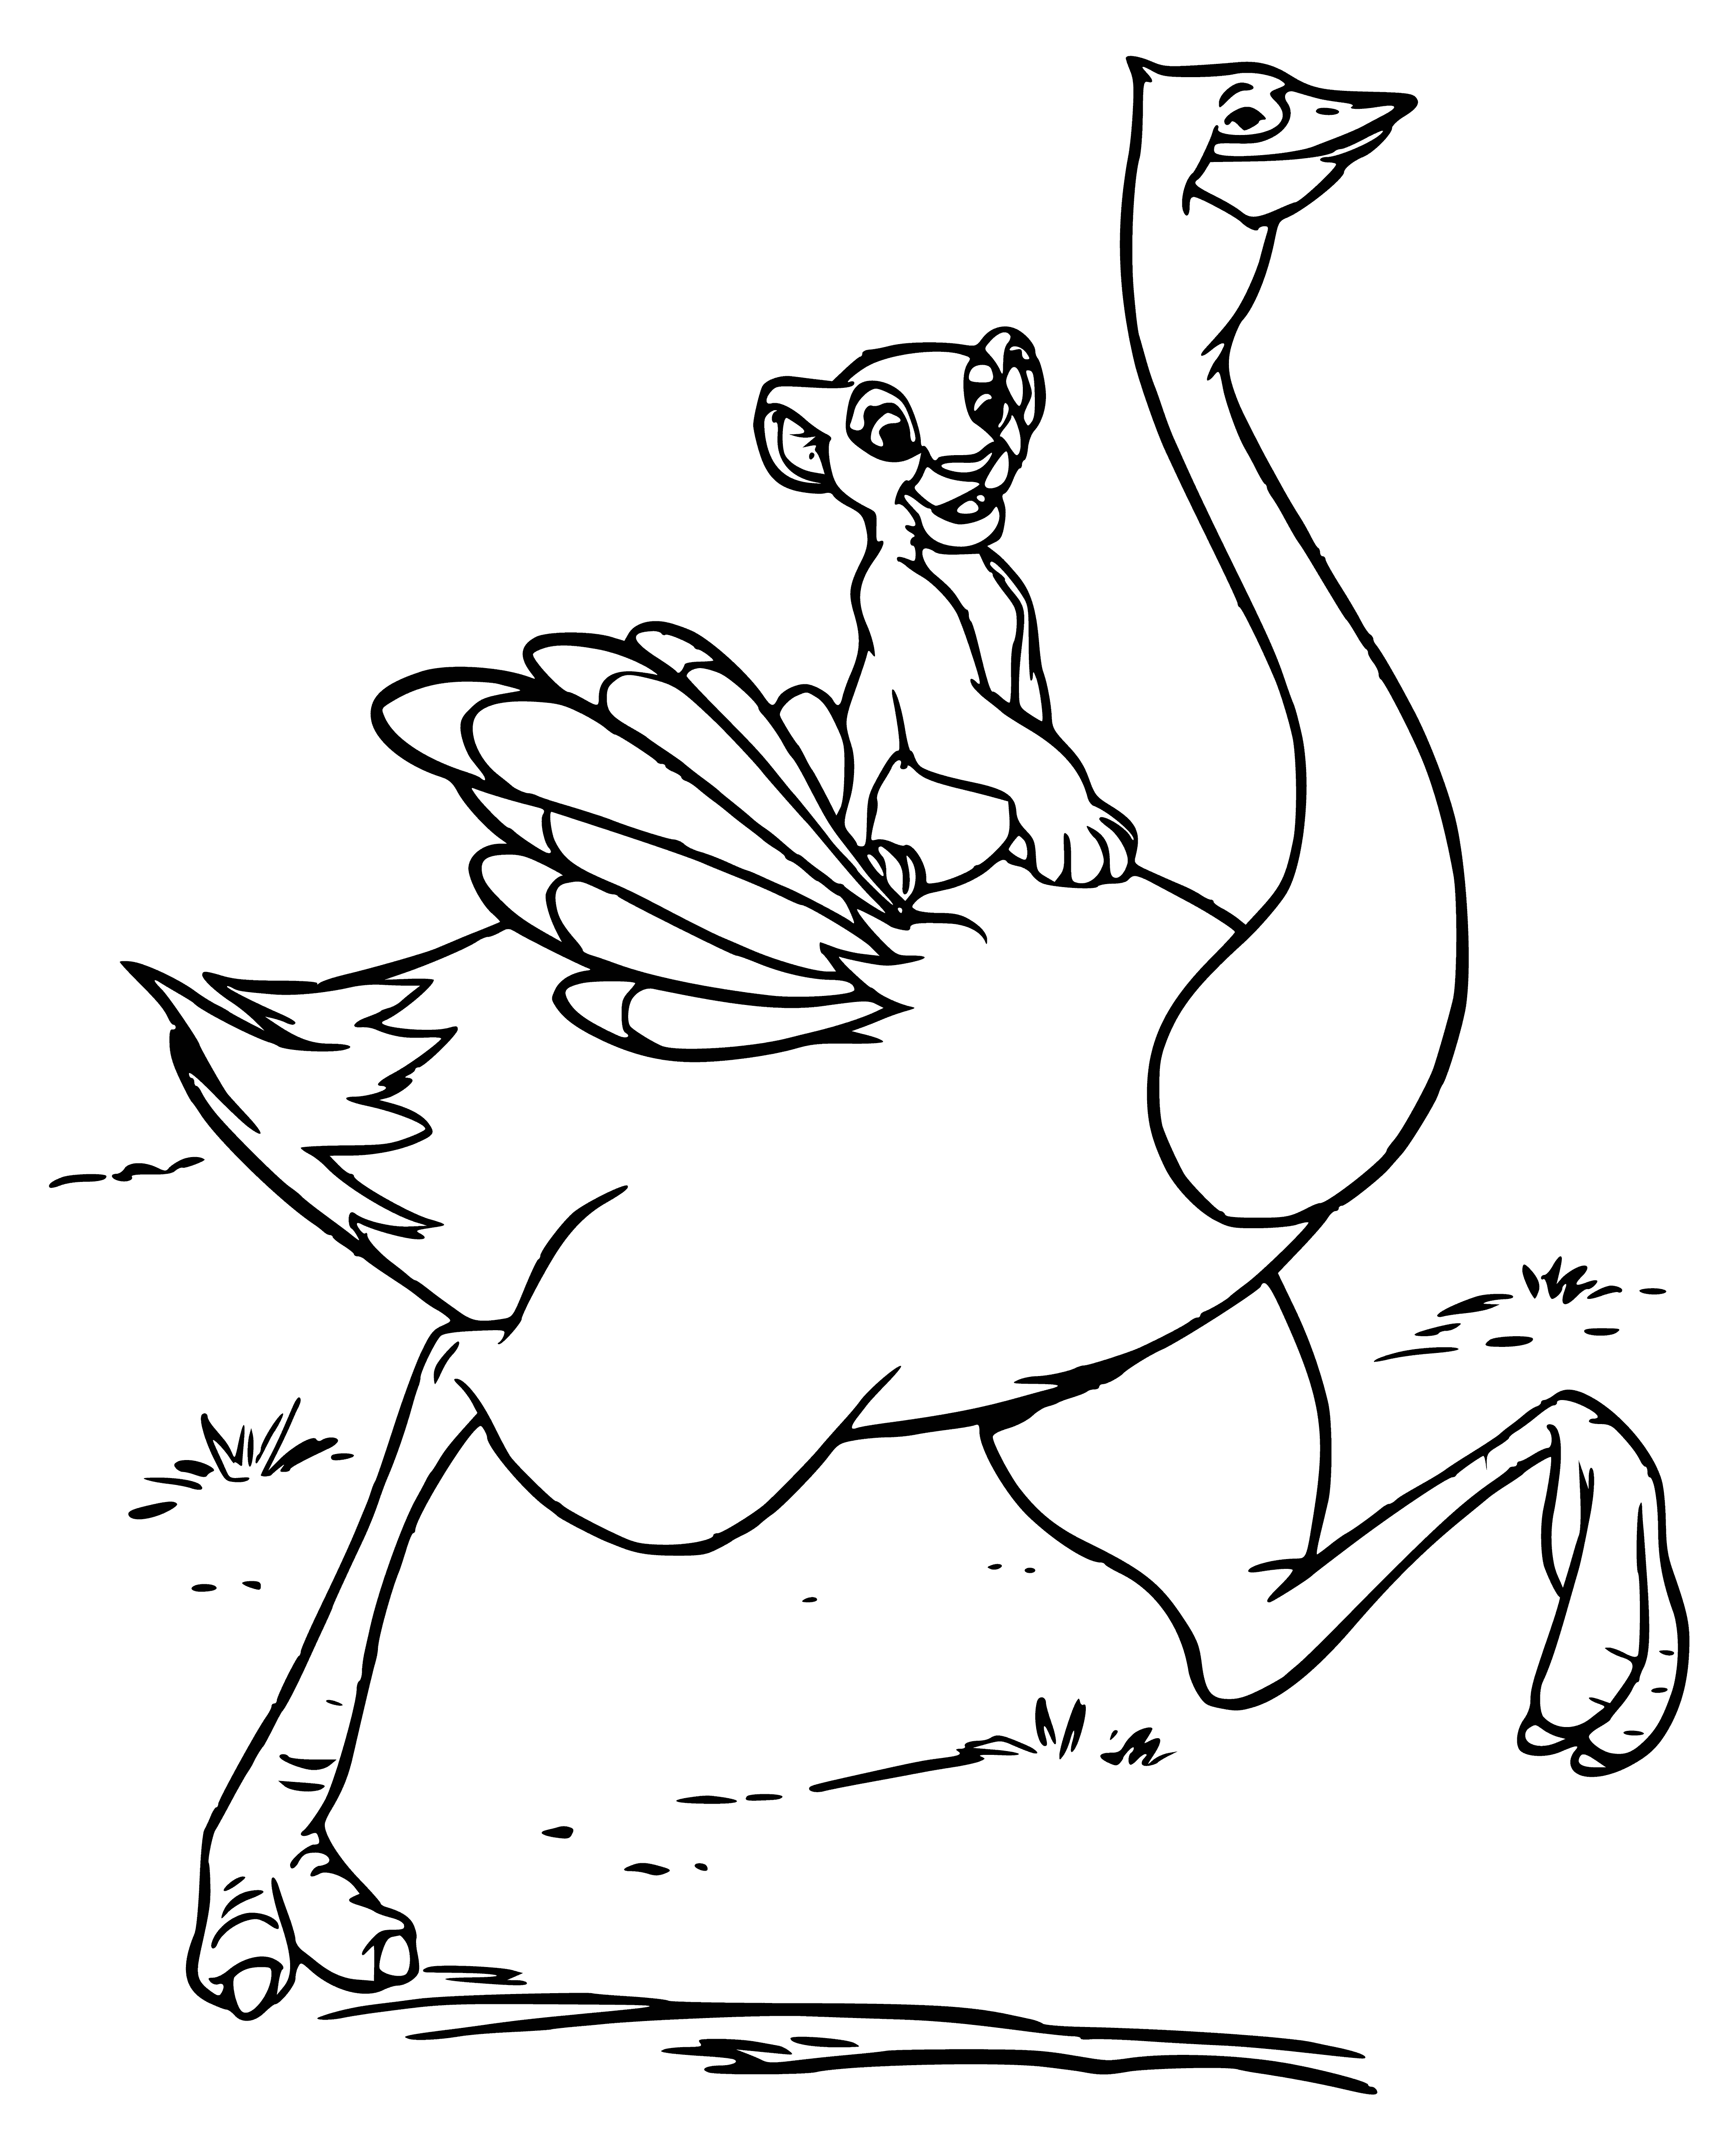 coloring page: Simba saves an ostrich from buffalo, ostrich bows down in thanks. #thelionking #animation #familymovies